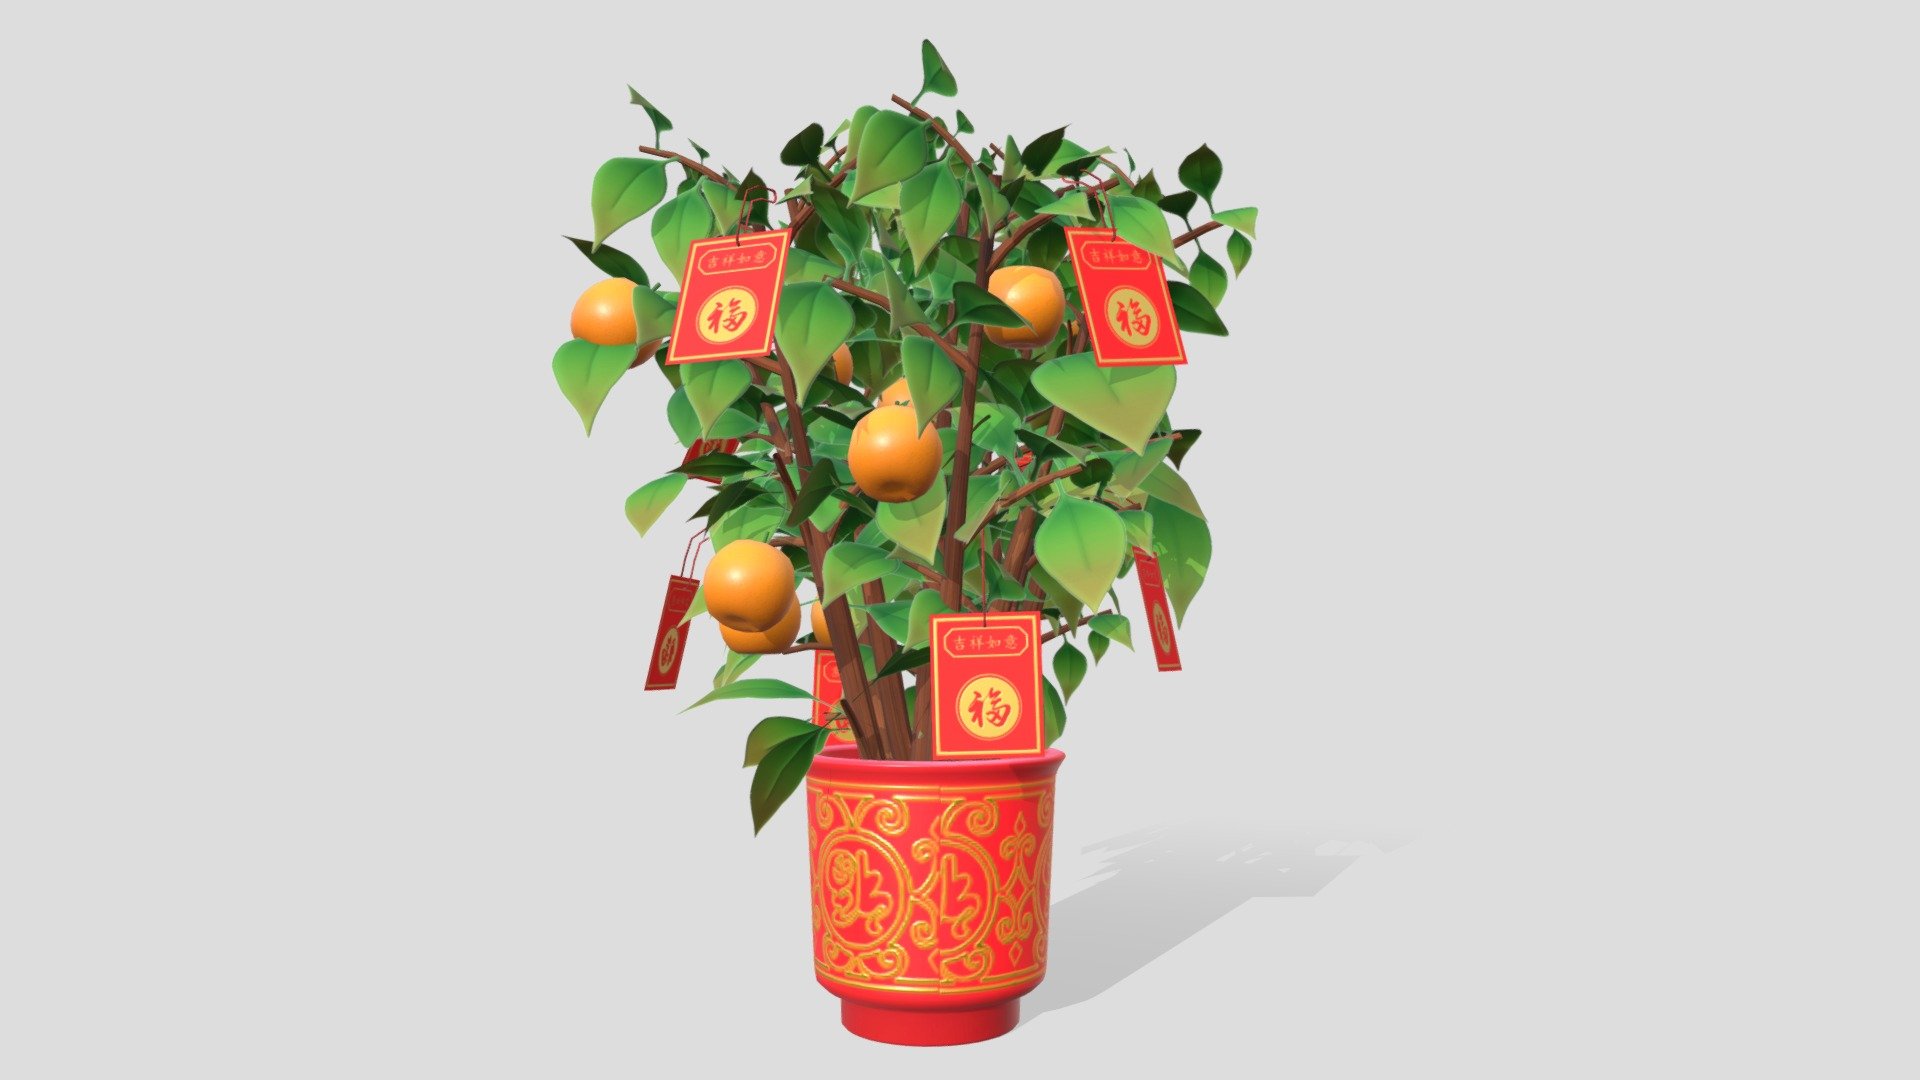 Realistic Chinese New Year tree with mini tangerines. Includes decorative hanging red packets.

Login to STB’s Tourism Information &amp; Services Hub for free downloads:
https://tih.stb.gov.sg/content/tih/en/marketing-and-media-assets/digital-images-andvideoslisting/digital-images-and-videos-detail.1047a56491214ba47eabce45f2a5a5e6579.Kumquat+Tree.html - Kumquat Tree - 3D model by STB-TC 3d model